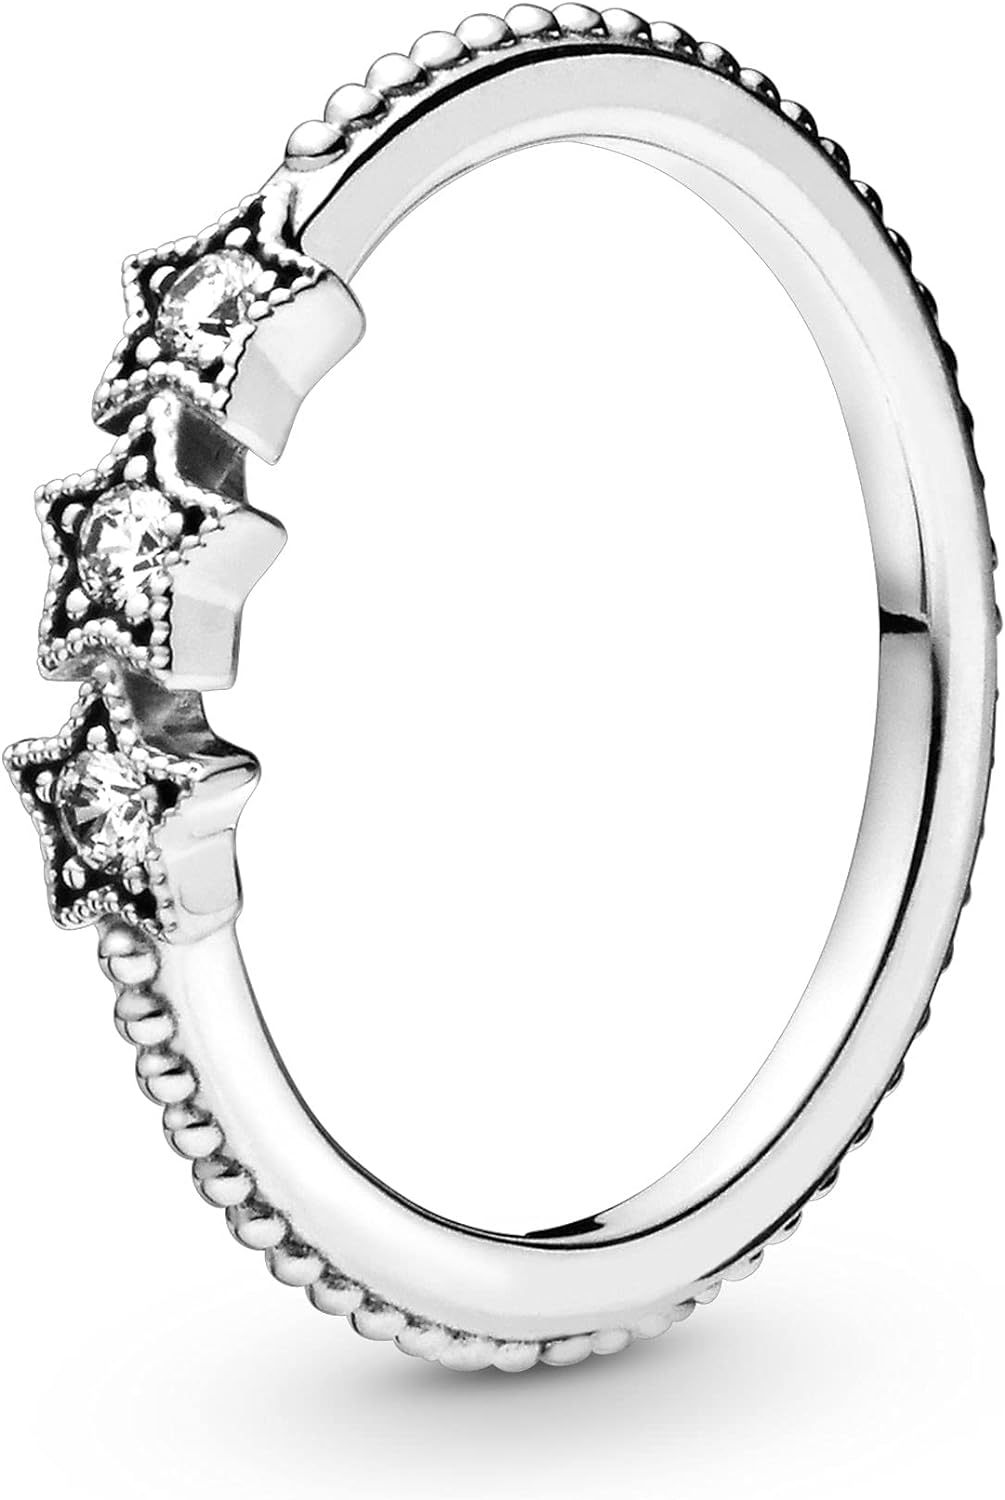 Pandora Celestial Stars Ring - Sterling Silver Ring for Women - Layering or Stackable Ring - Sterling Silver with Clear Cubic Zirconia - Size 7.5, No Gift Box